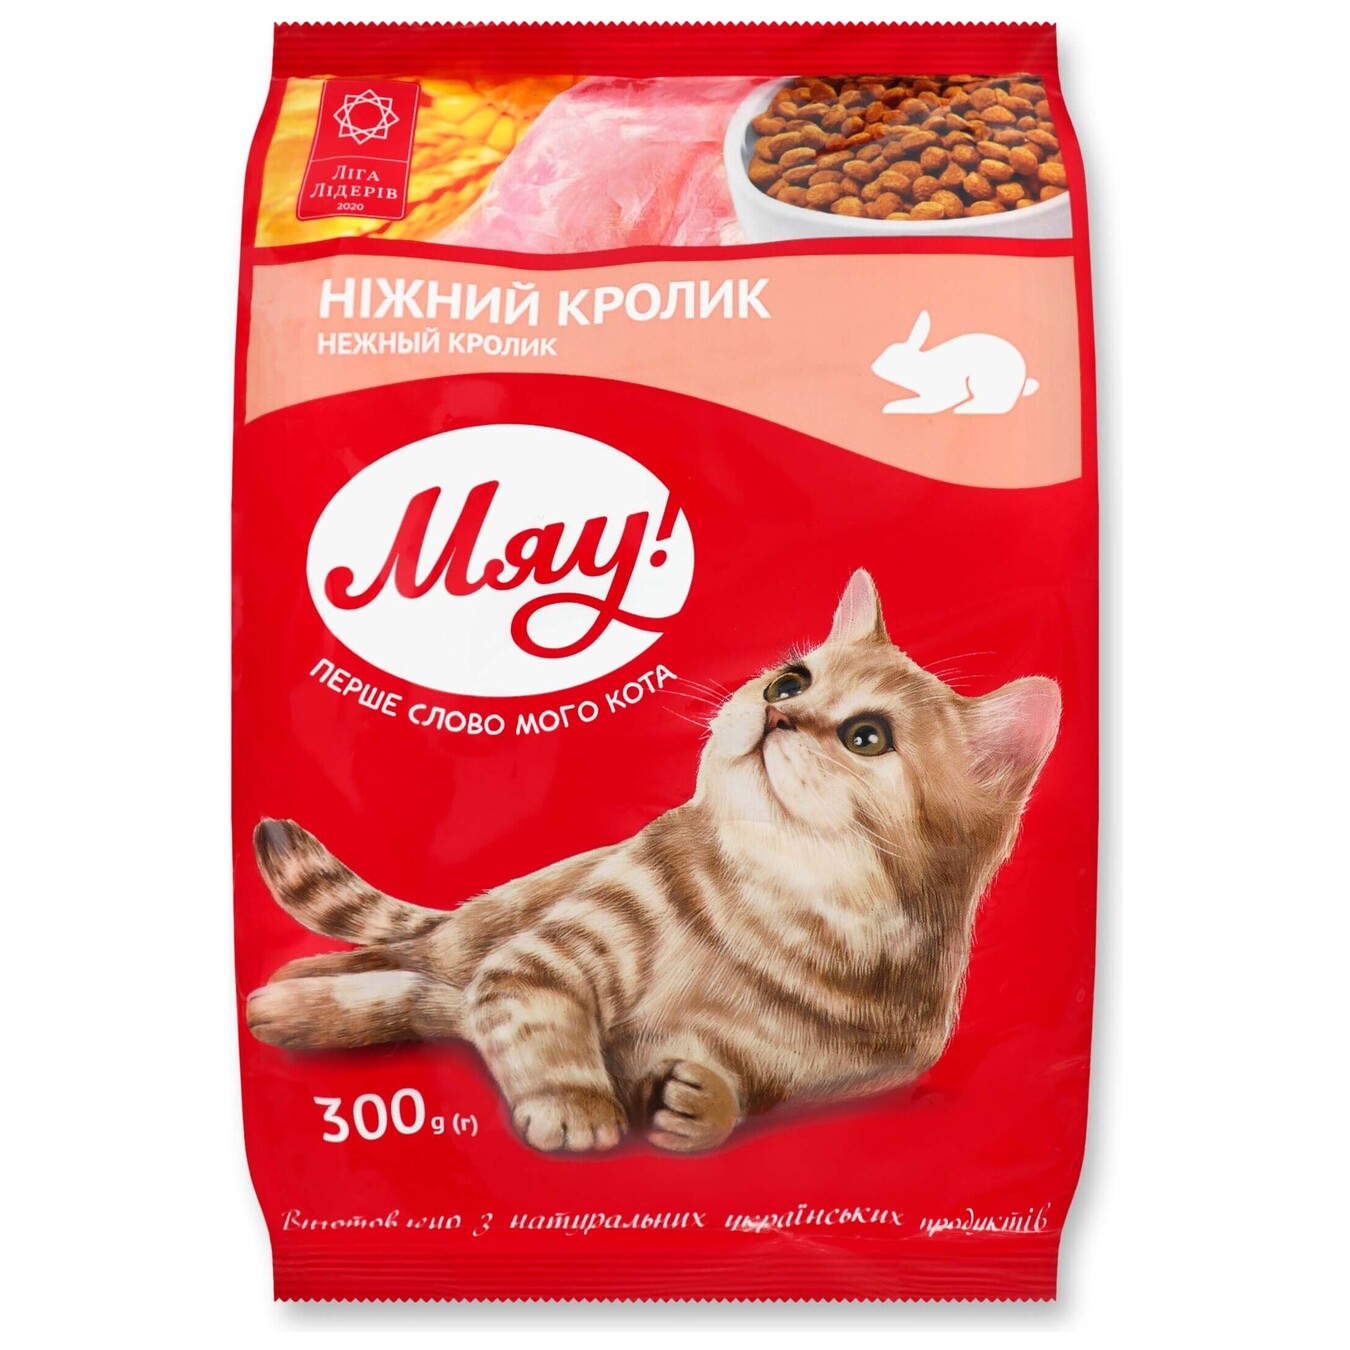 Meow! dry food for cats with a rabbit 300g